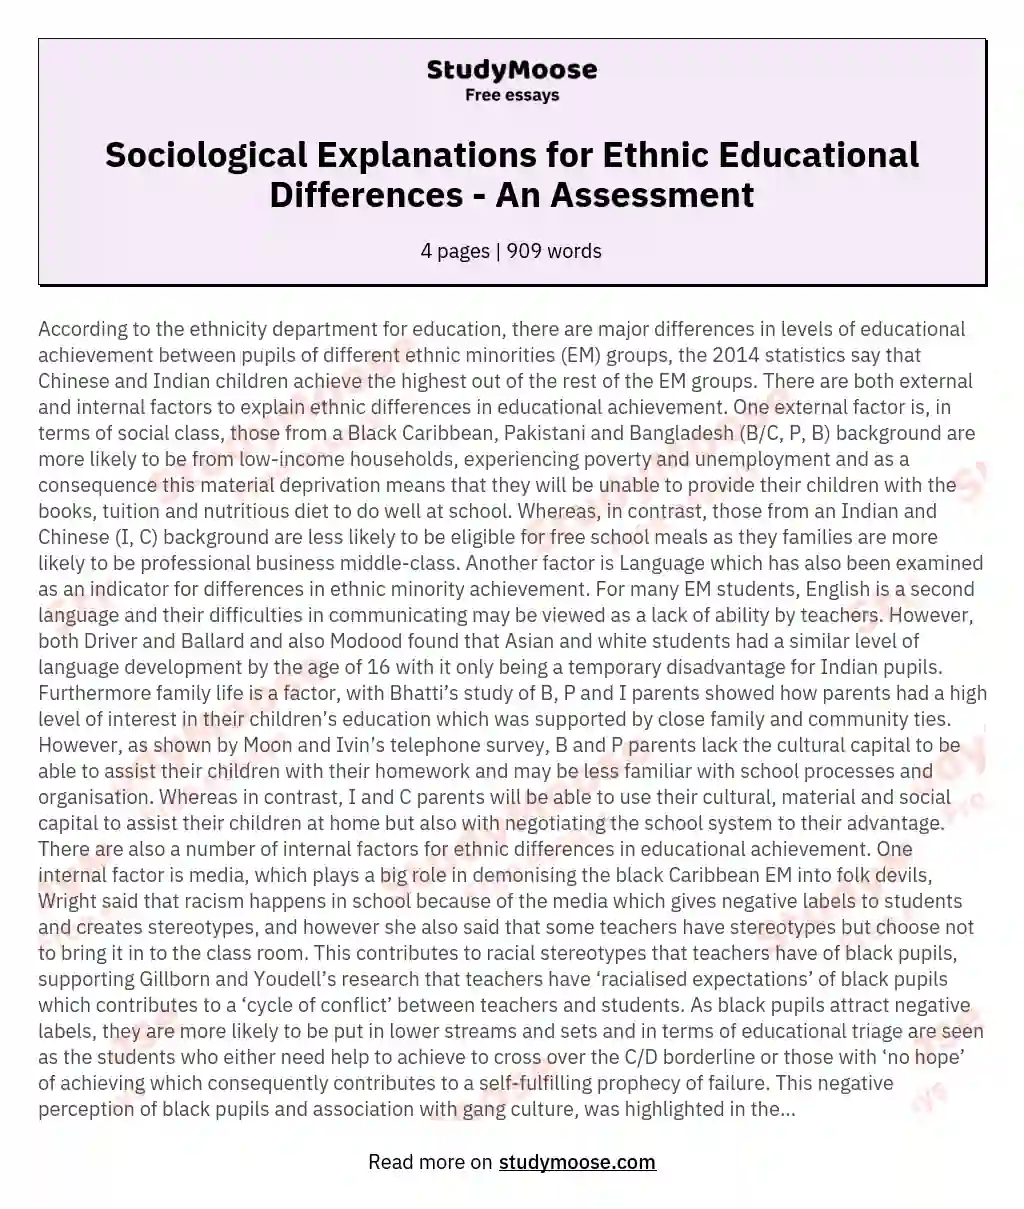 Assess the sociological explanations for ethnic differences in educational achievement